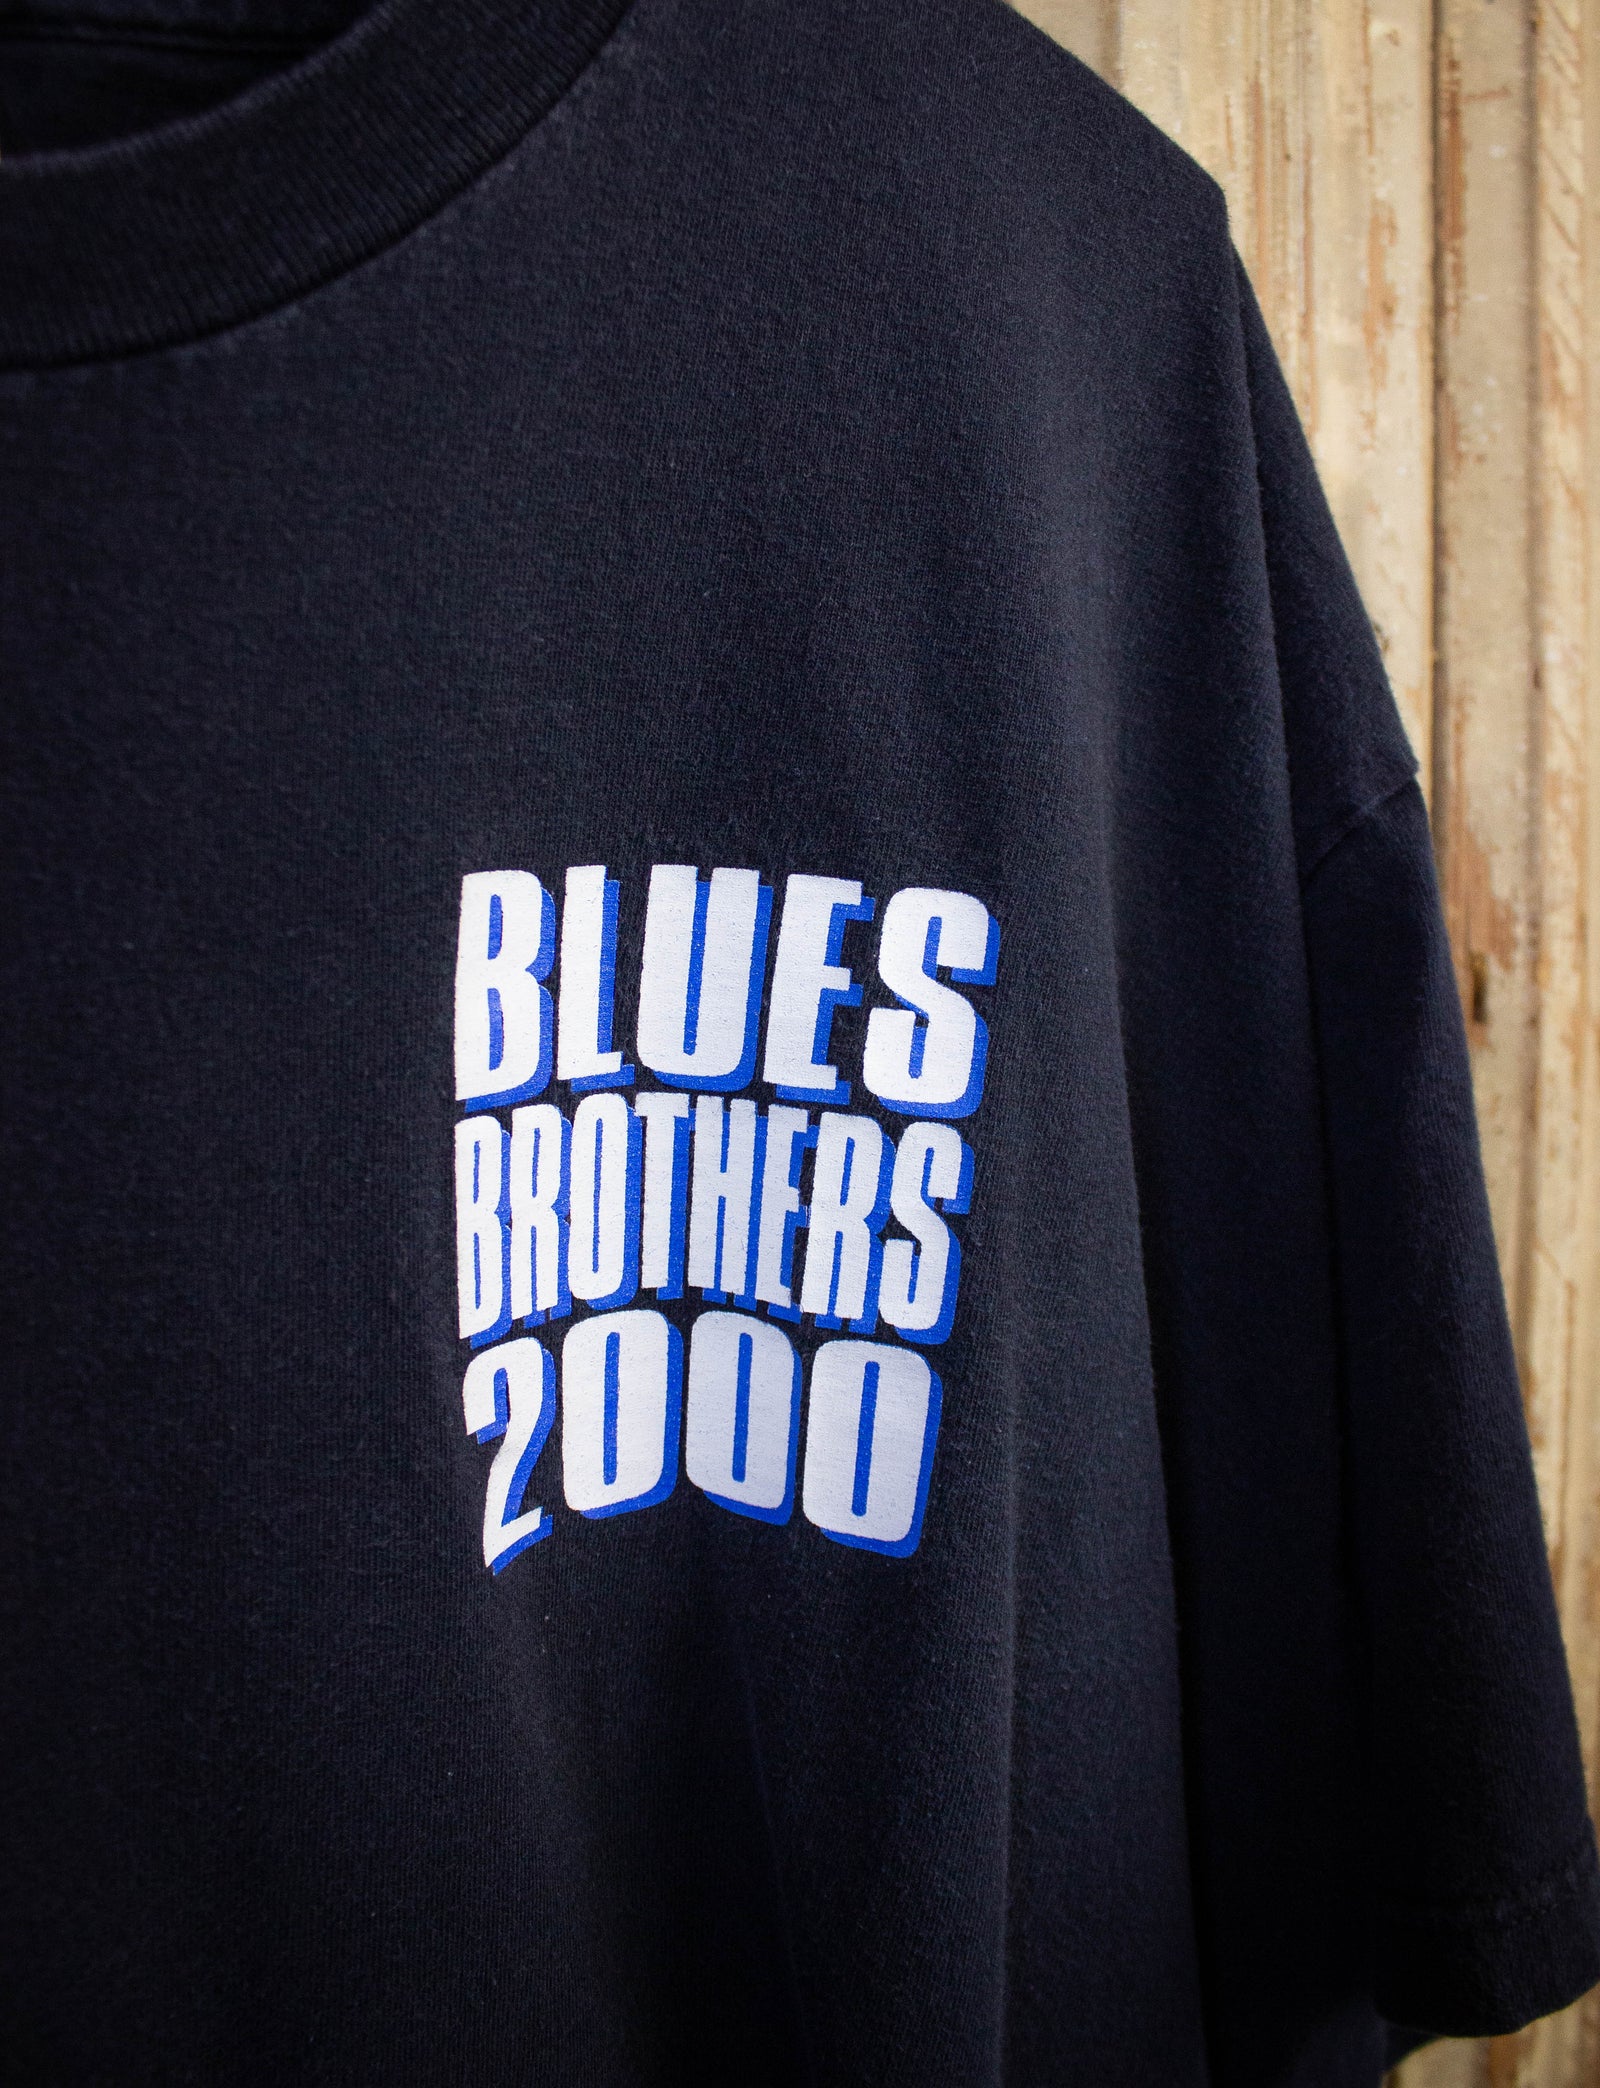 Vintage Blues Brothers Graphic T-Shirt 2000 XL